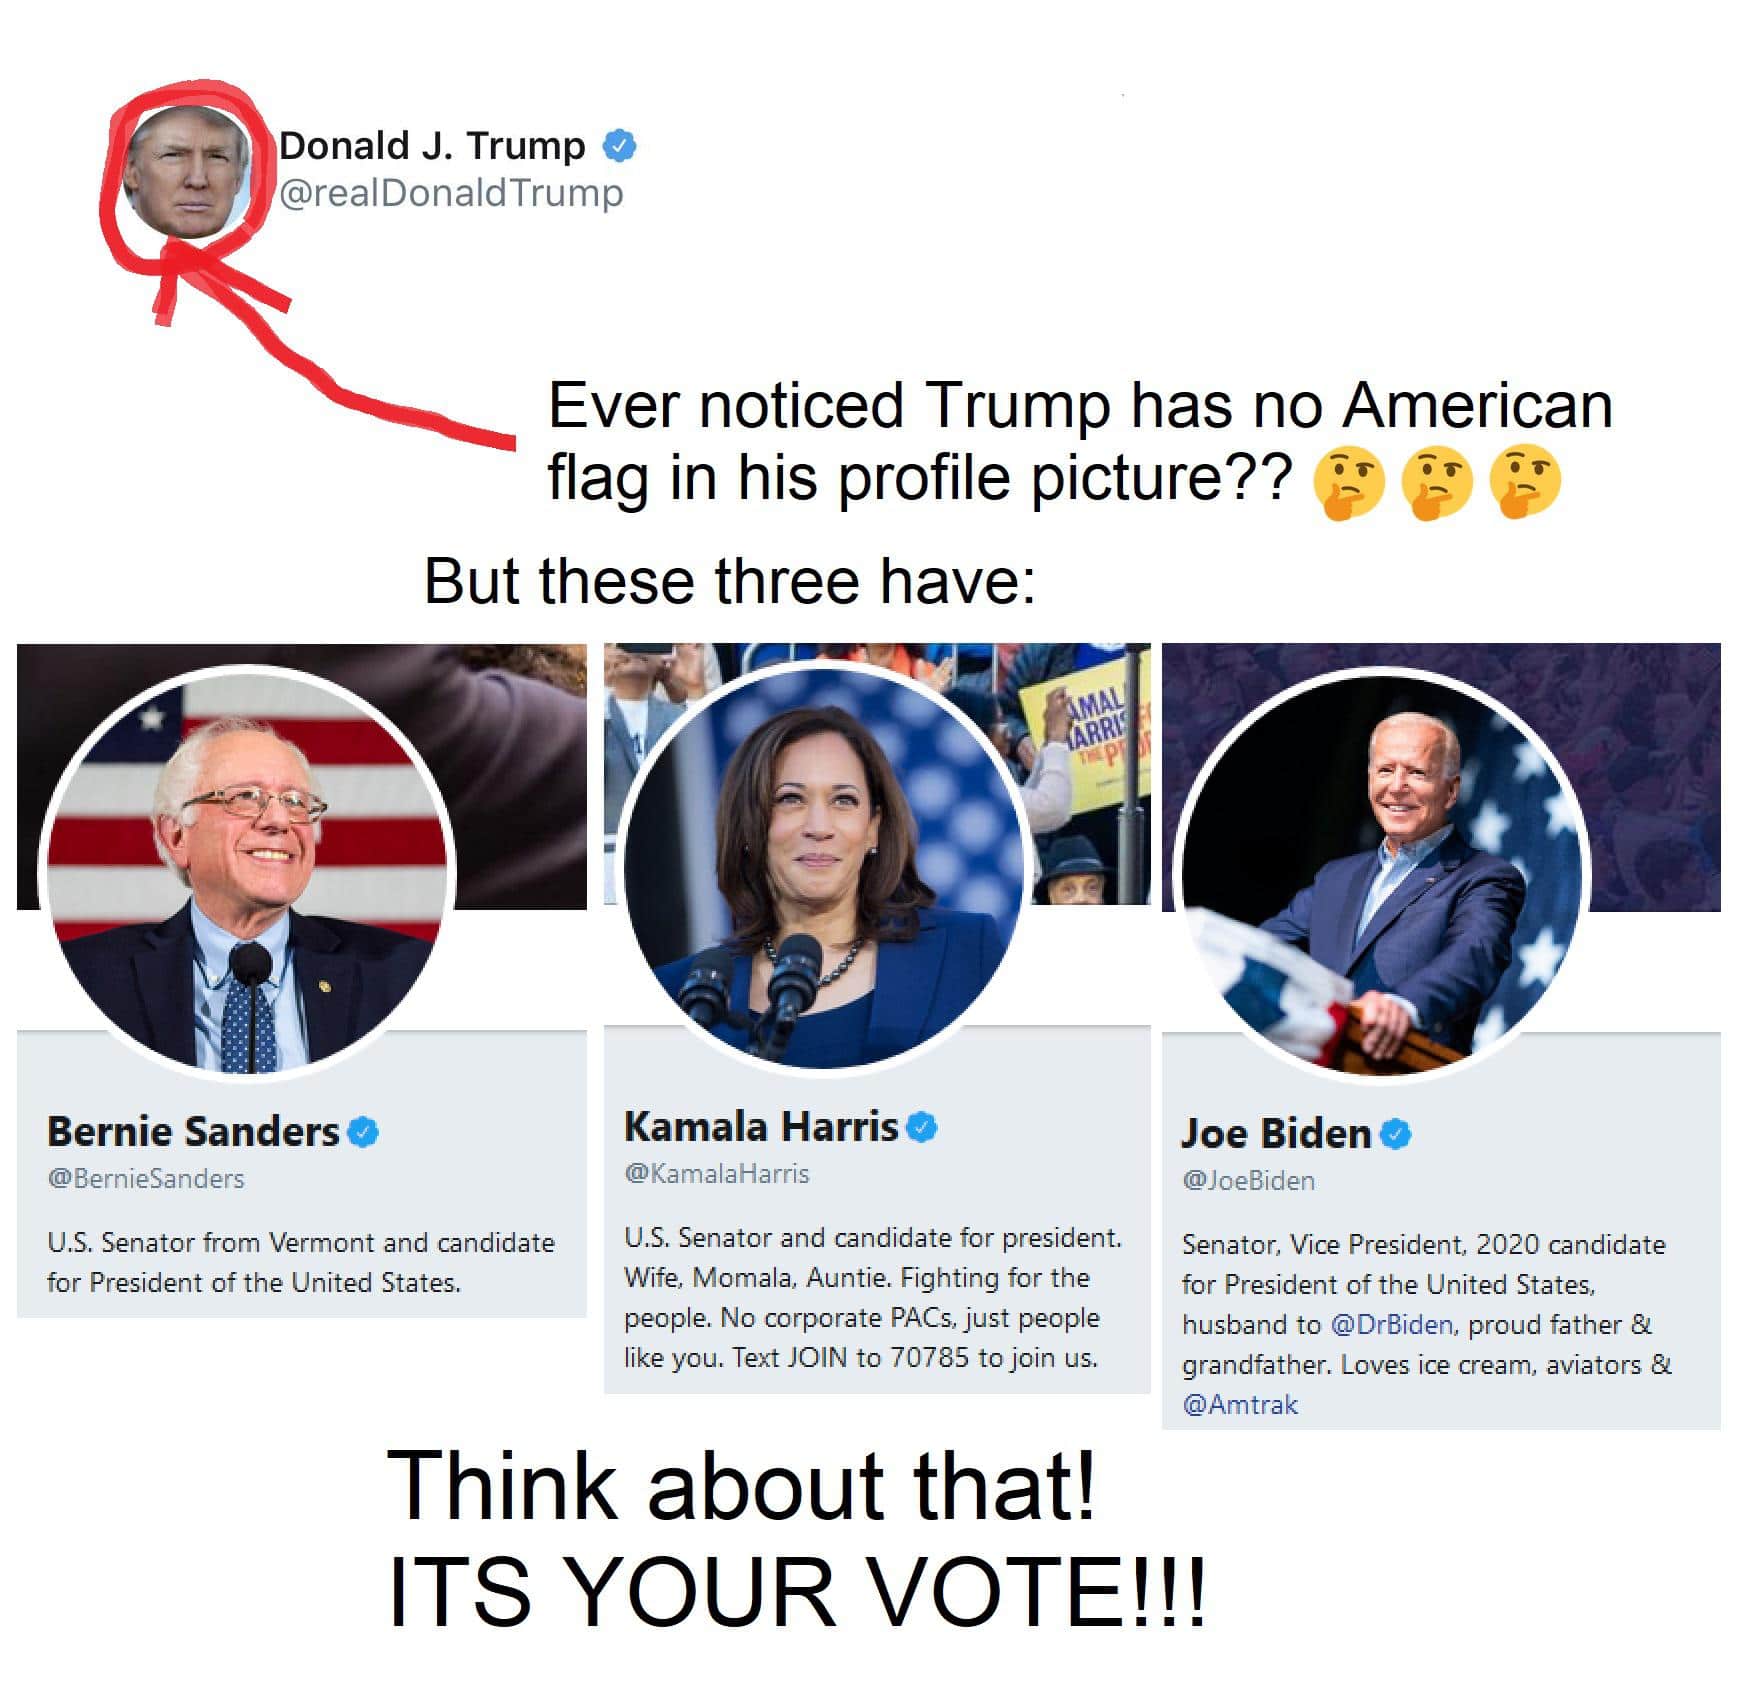 political political-memes political text: Donald J. Trump @realDonaldTrump Ever noticed Trump has no American flag in his profile picture?? But these three have: Bernie Sanders @8ernieSanders LIS. Senator from Vermont and candidate for President of the United States. Kamala Harris O @KamalaHarris LIS Senator and candidate for president, Wife, Momala, Auntie, Fighting for the people. No corporate PACs, just people like you, Text JOIN to 70785 to join us, Joe Biden O @Joe8iden Senator, Vice President, 2020 candidate for President of the United States, husband to @Dr8iden, proud father & grandfather. Loves ice cream, aviators & @Amtrak Think about that! ITS YOUR VOTE!!! 